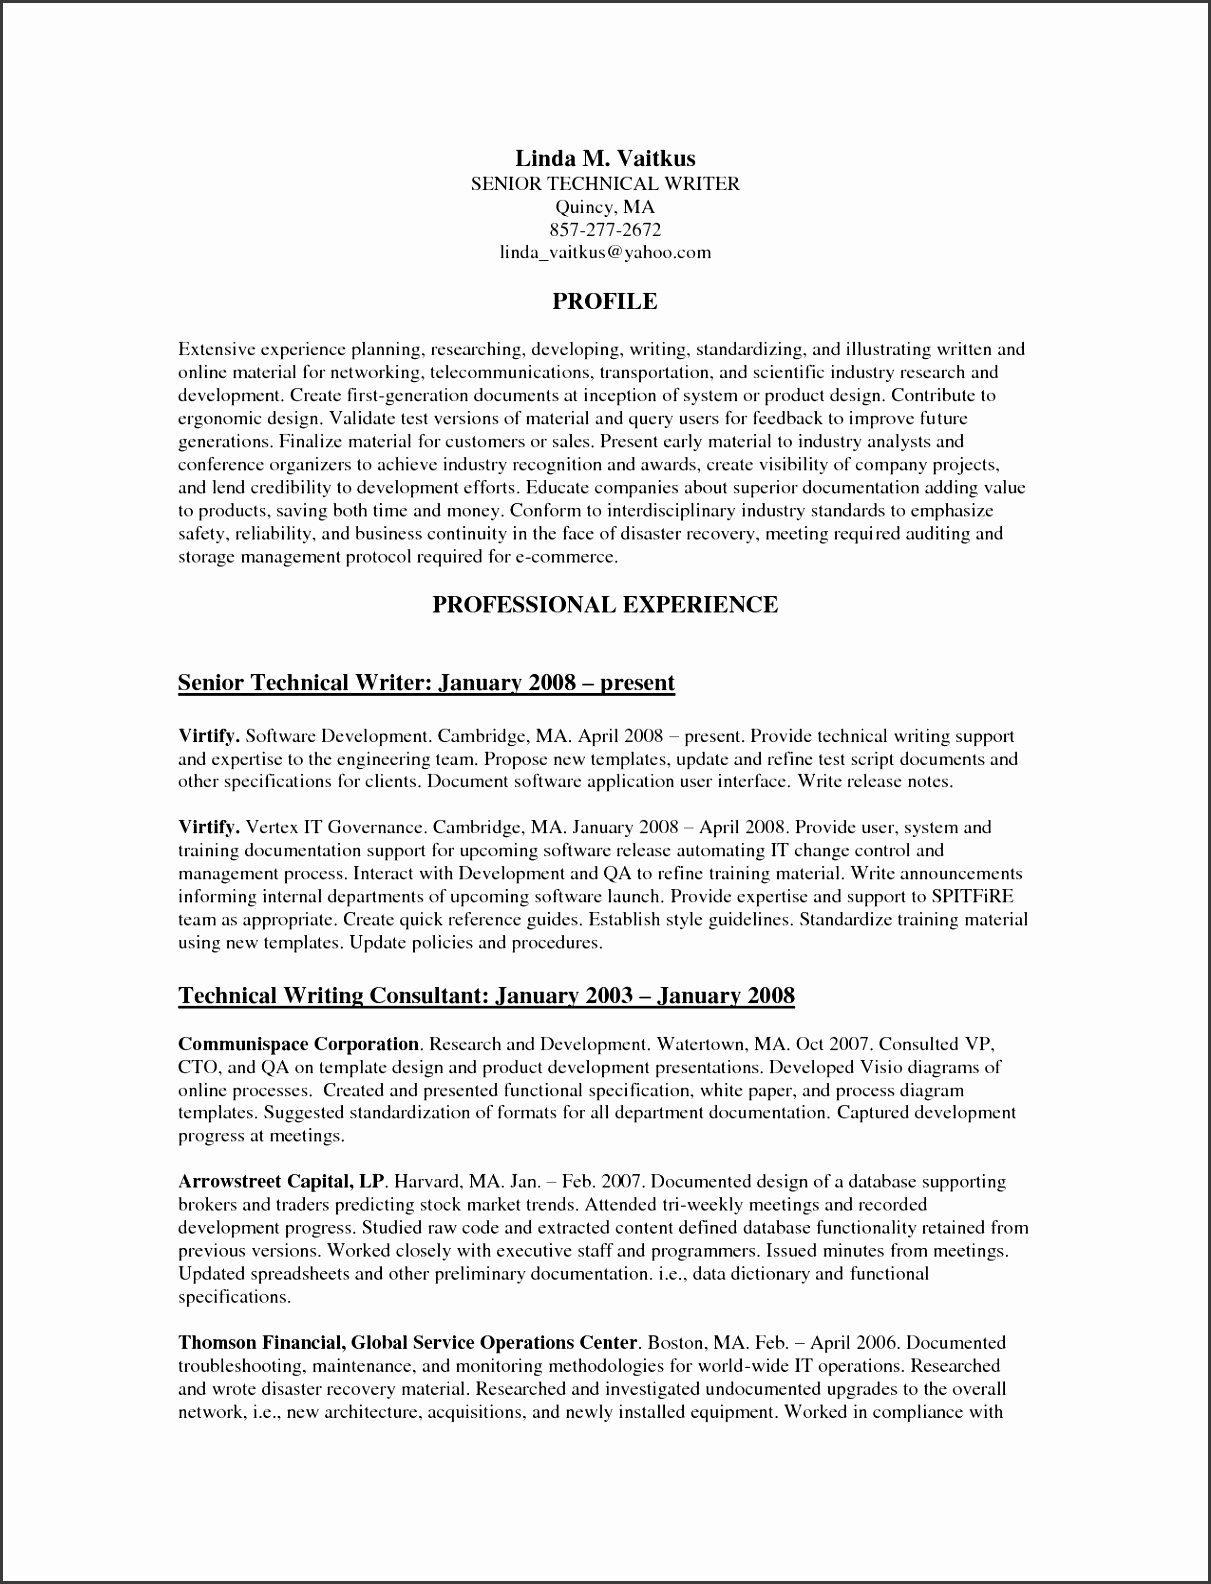 Professional Resume Writers z arf Aaaaeroincus Unusual Your Resume Is Boring How To Write A